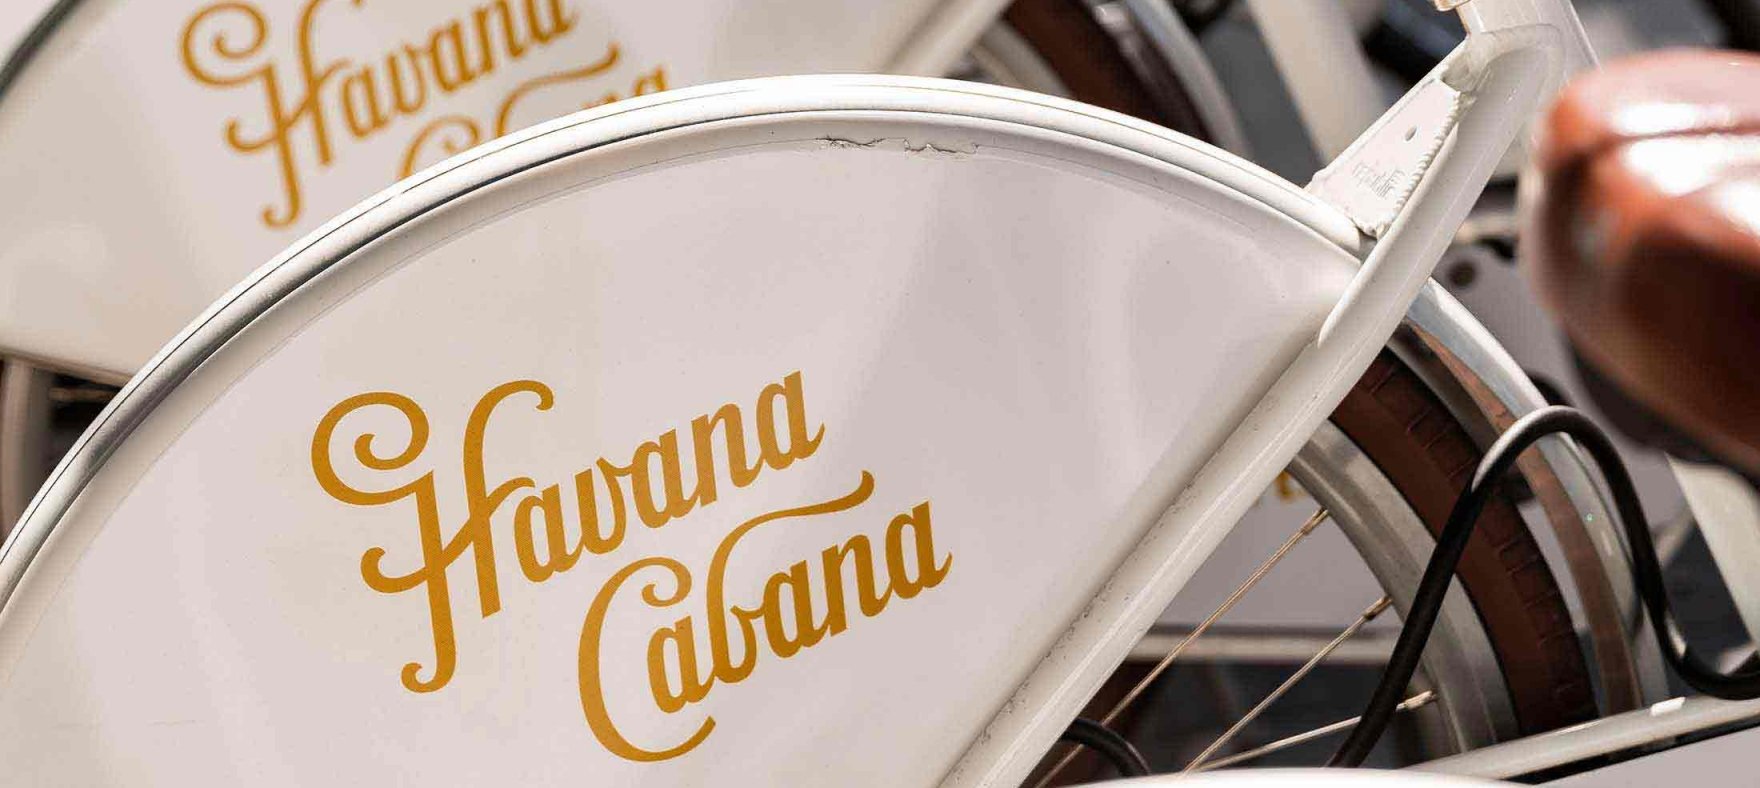 A close focus on the Havana Cabana logo placed on the top corder of the bikes' tires